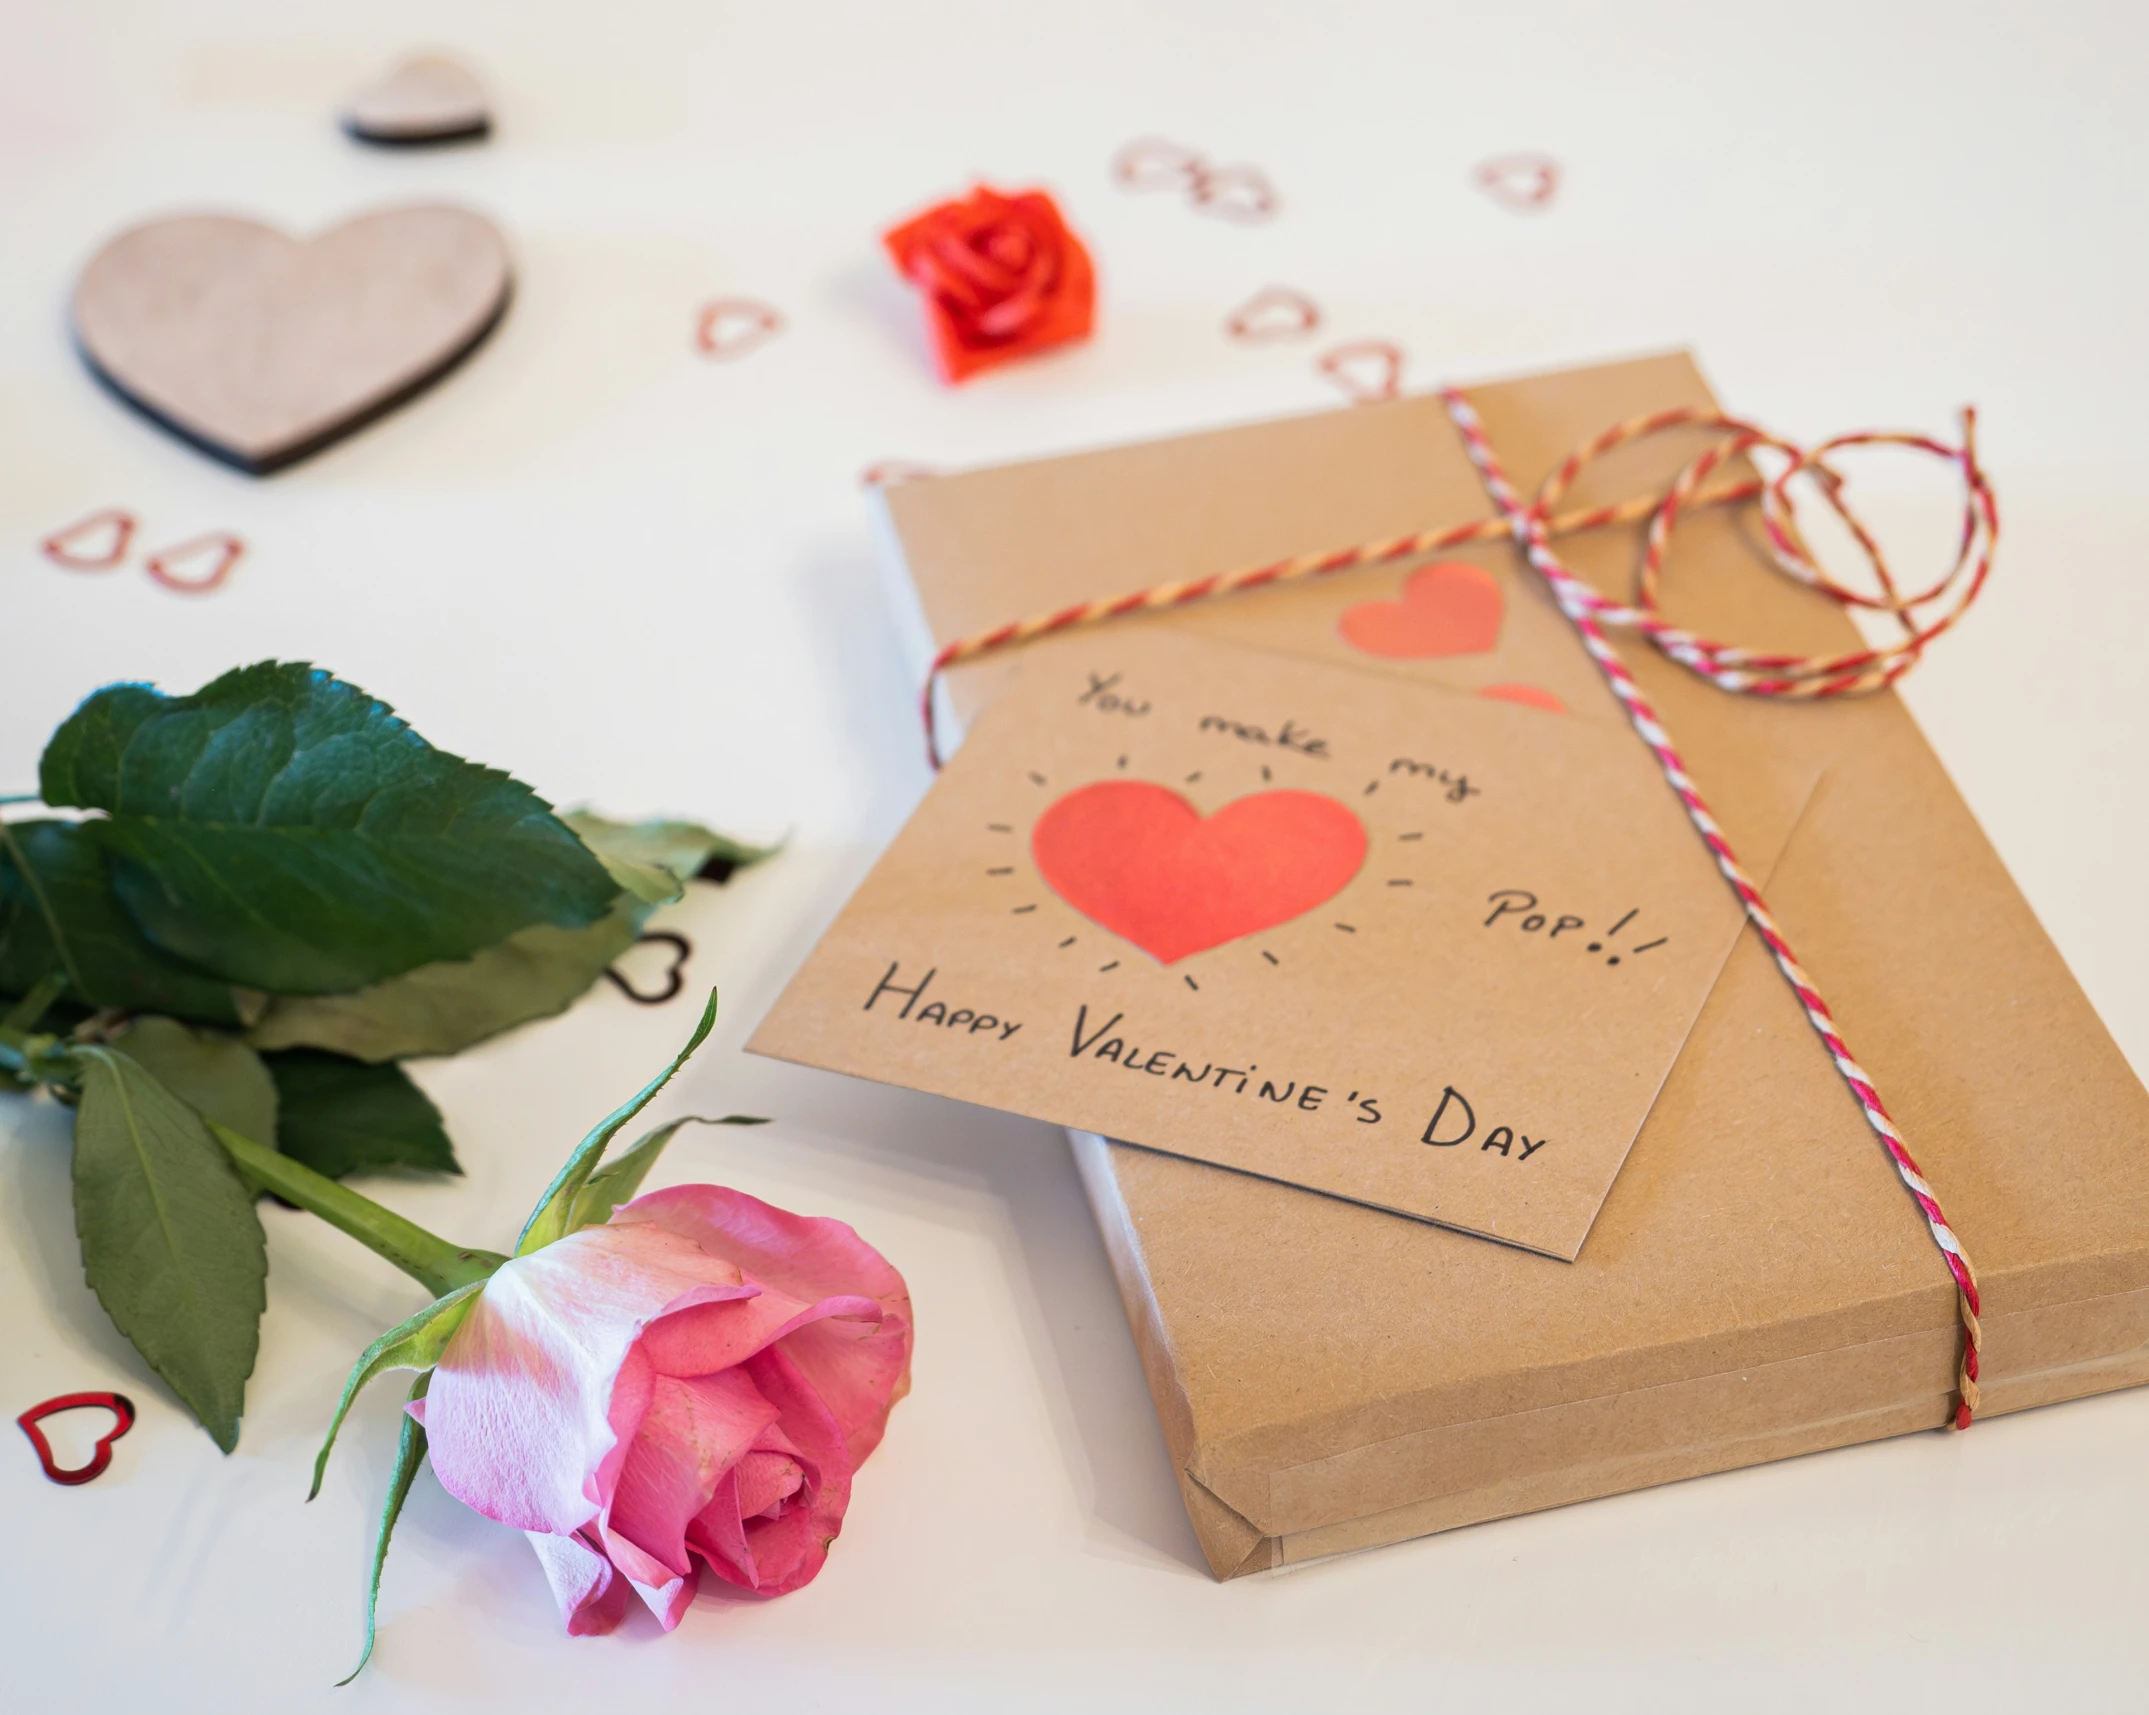 two brown packages with red and pink hearts are shown